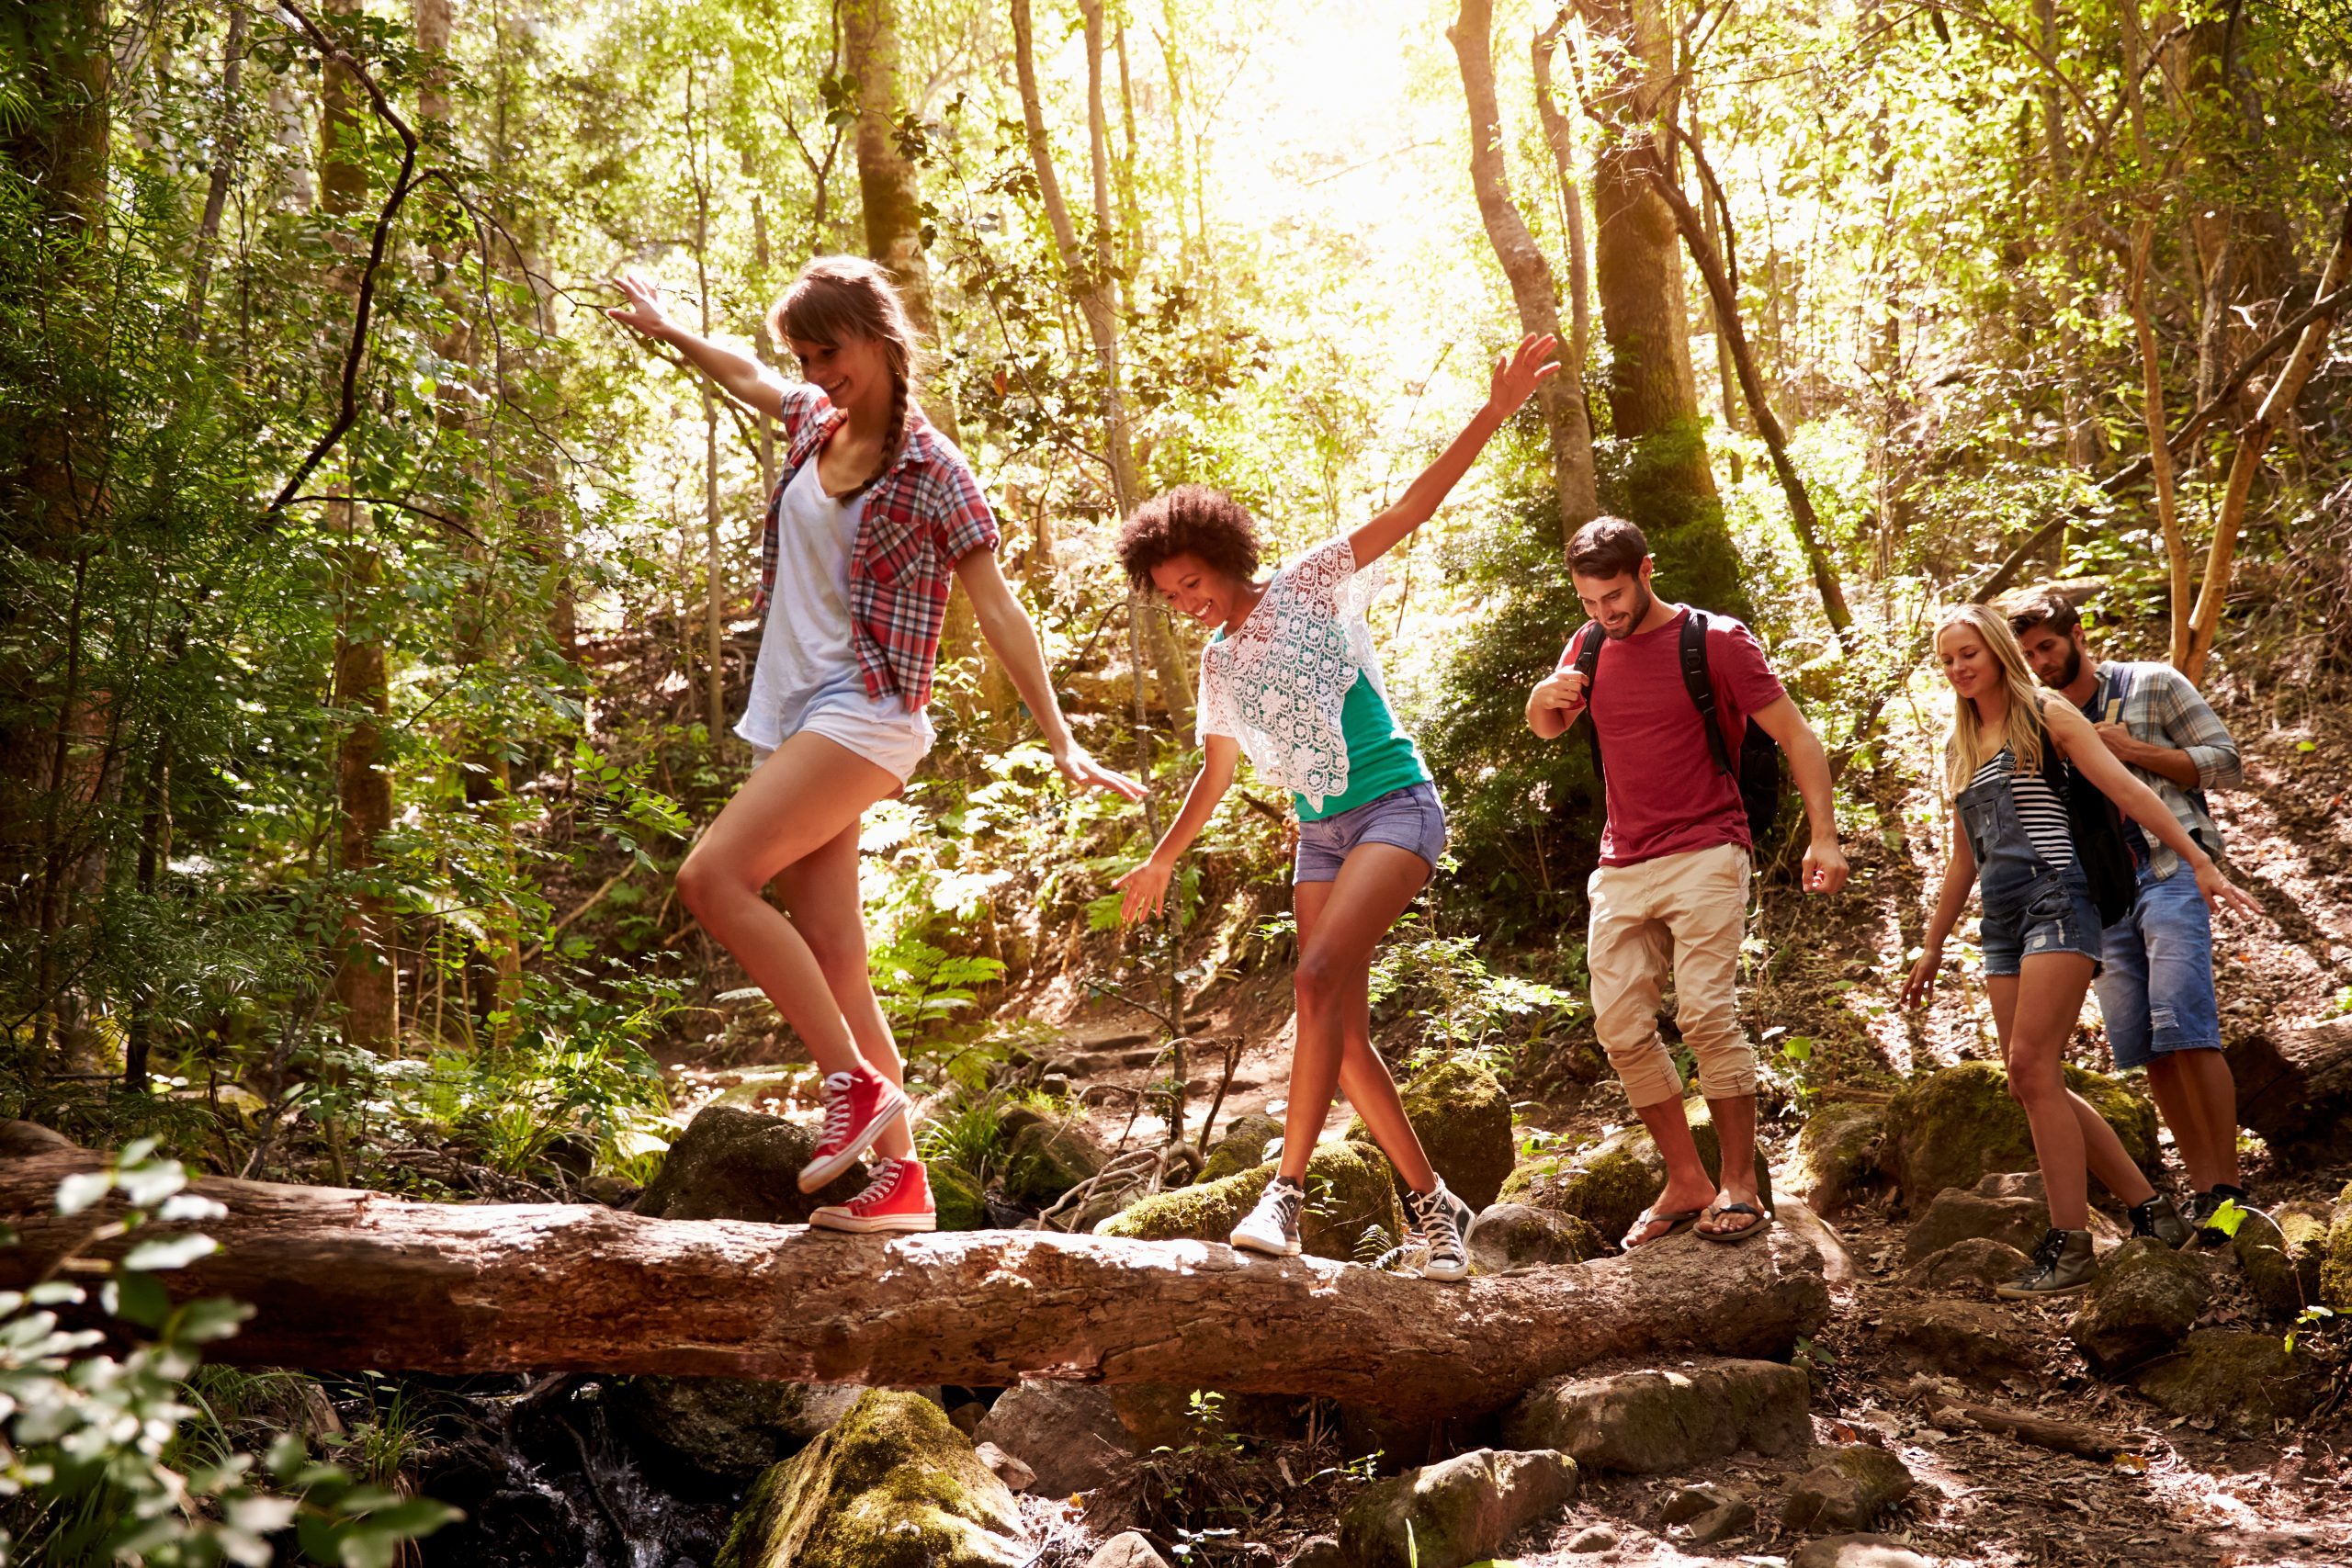 Four kids balancing on a large wooden log in a forest